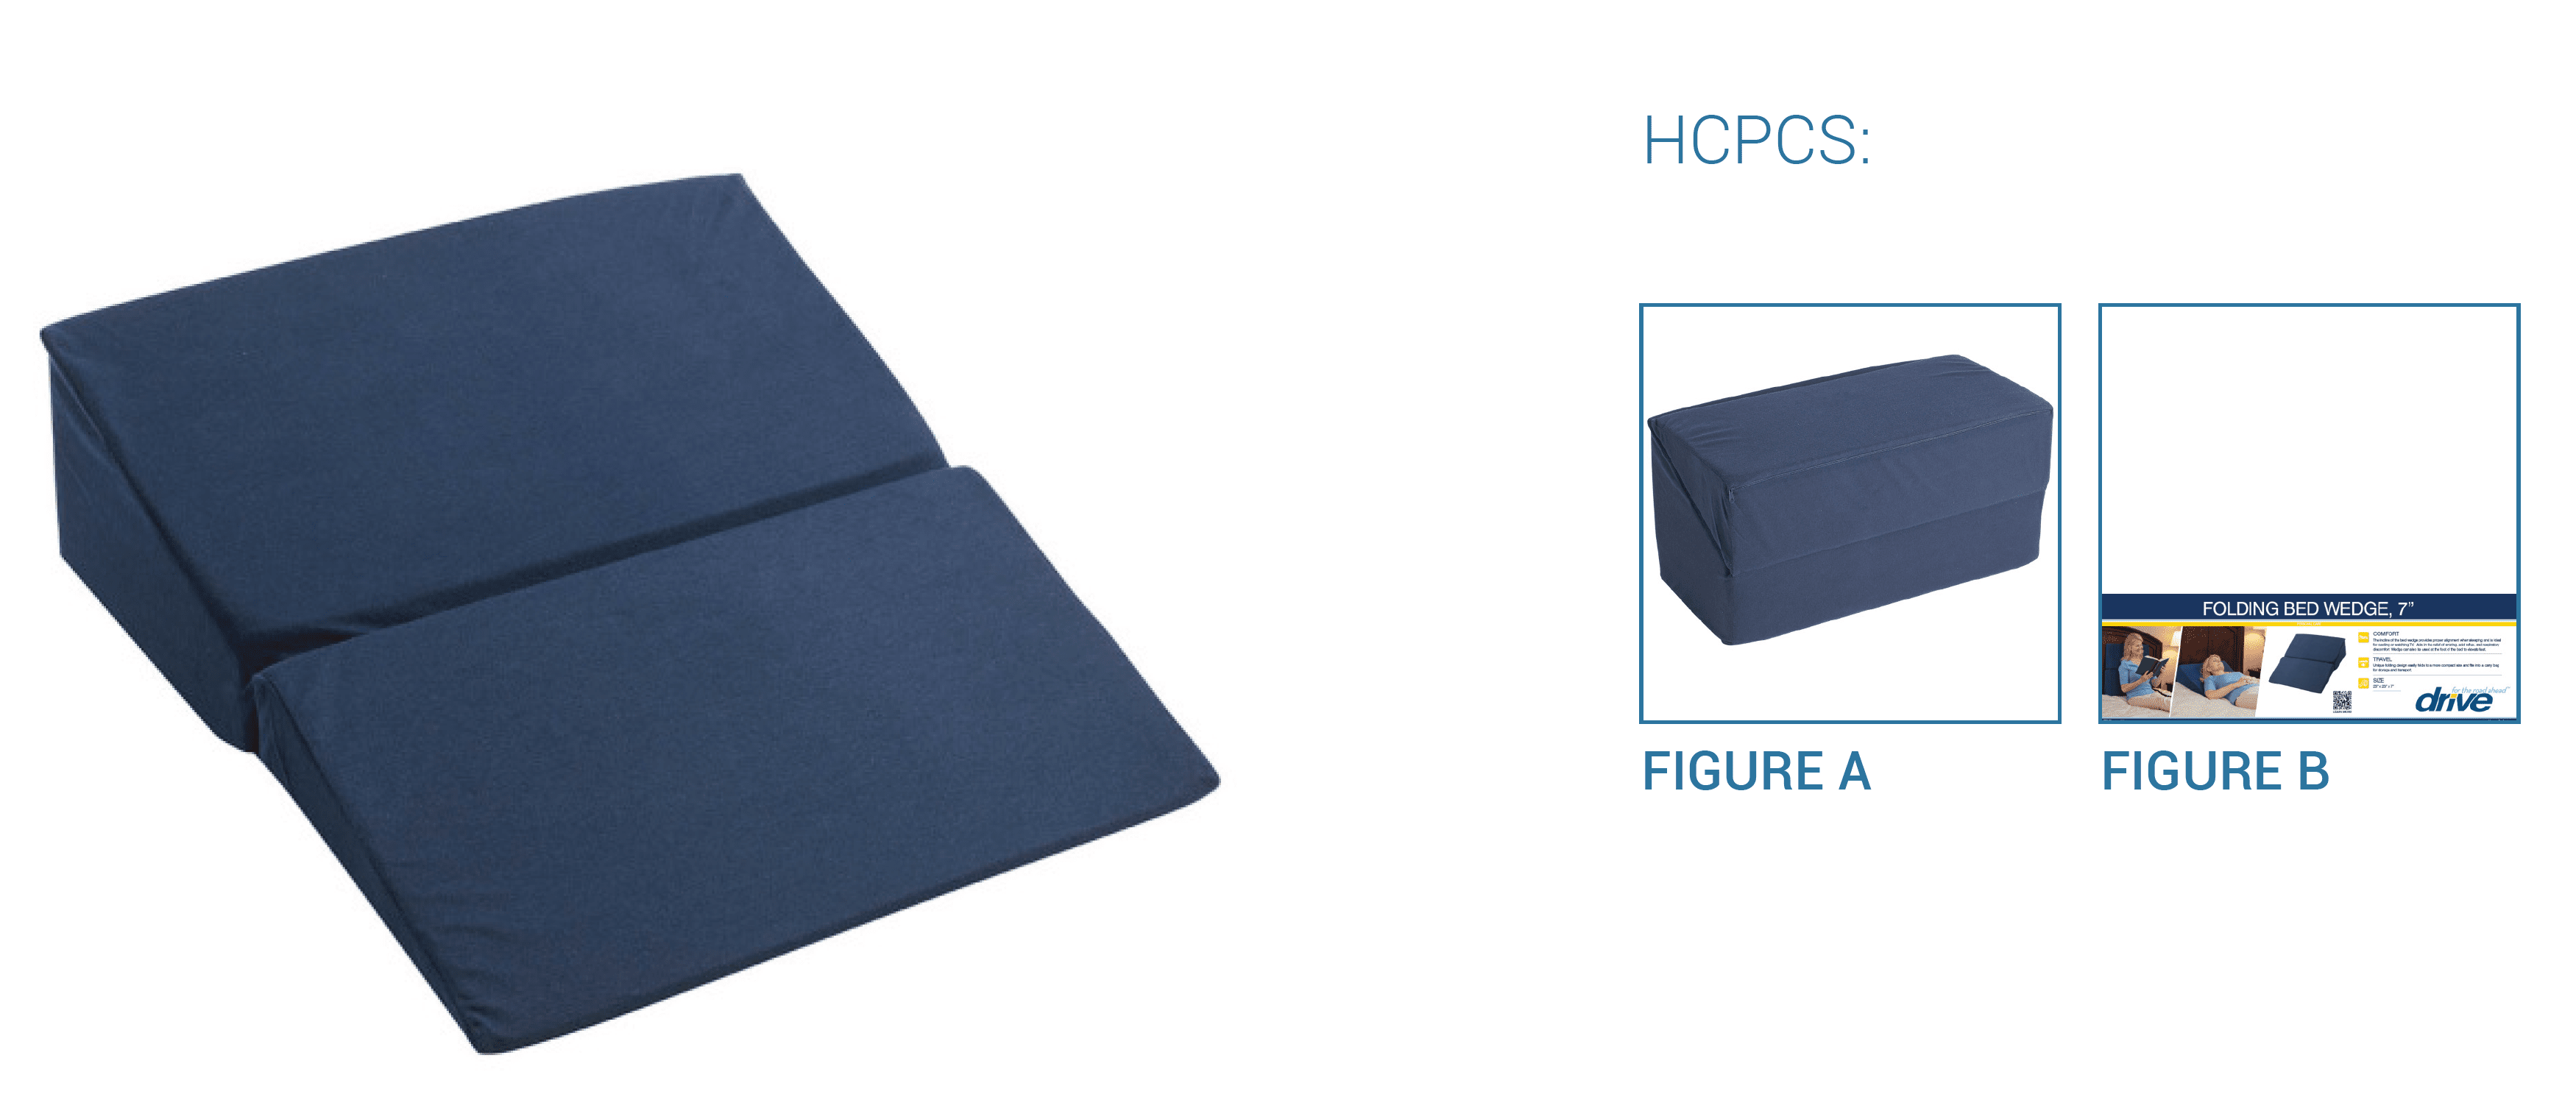 Folding Bed Wedges: Help Inc. - Everyone is relying on you. You can rely on us.